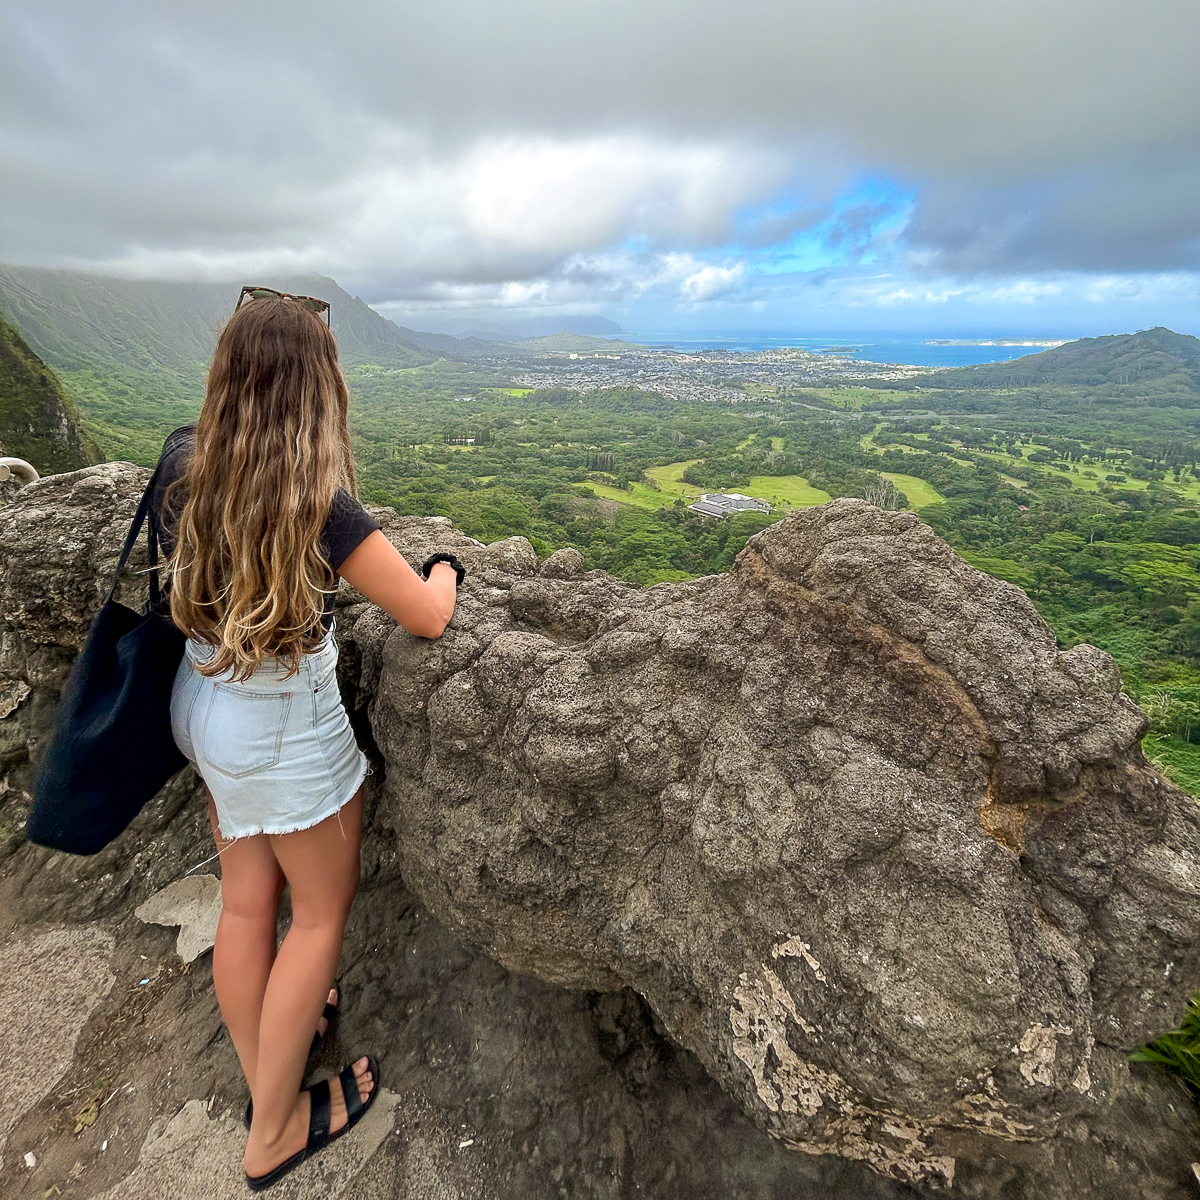 Maddy enjoying the panoramic views of mountains, Kailua town, and blue ocean from the Pali Highway lookout